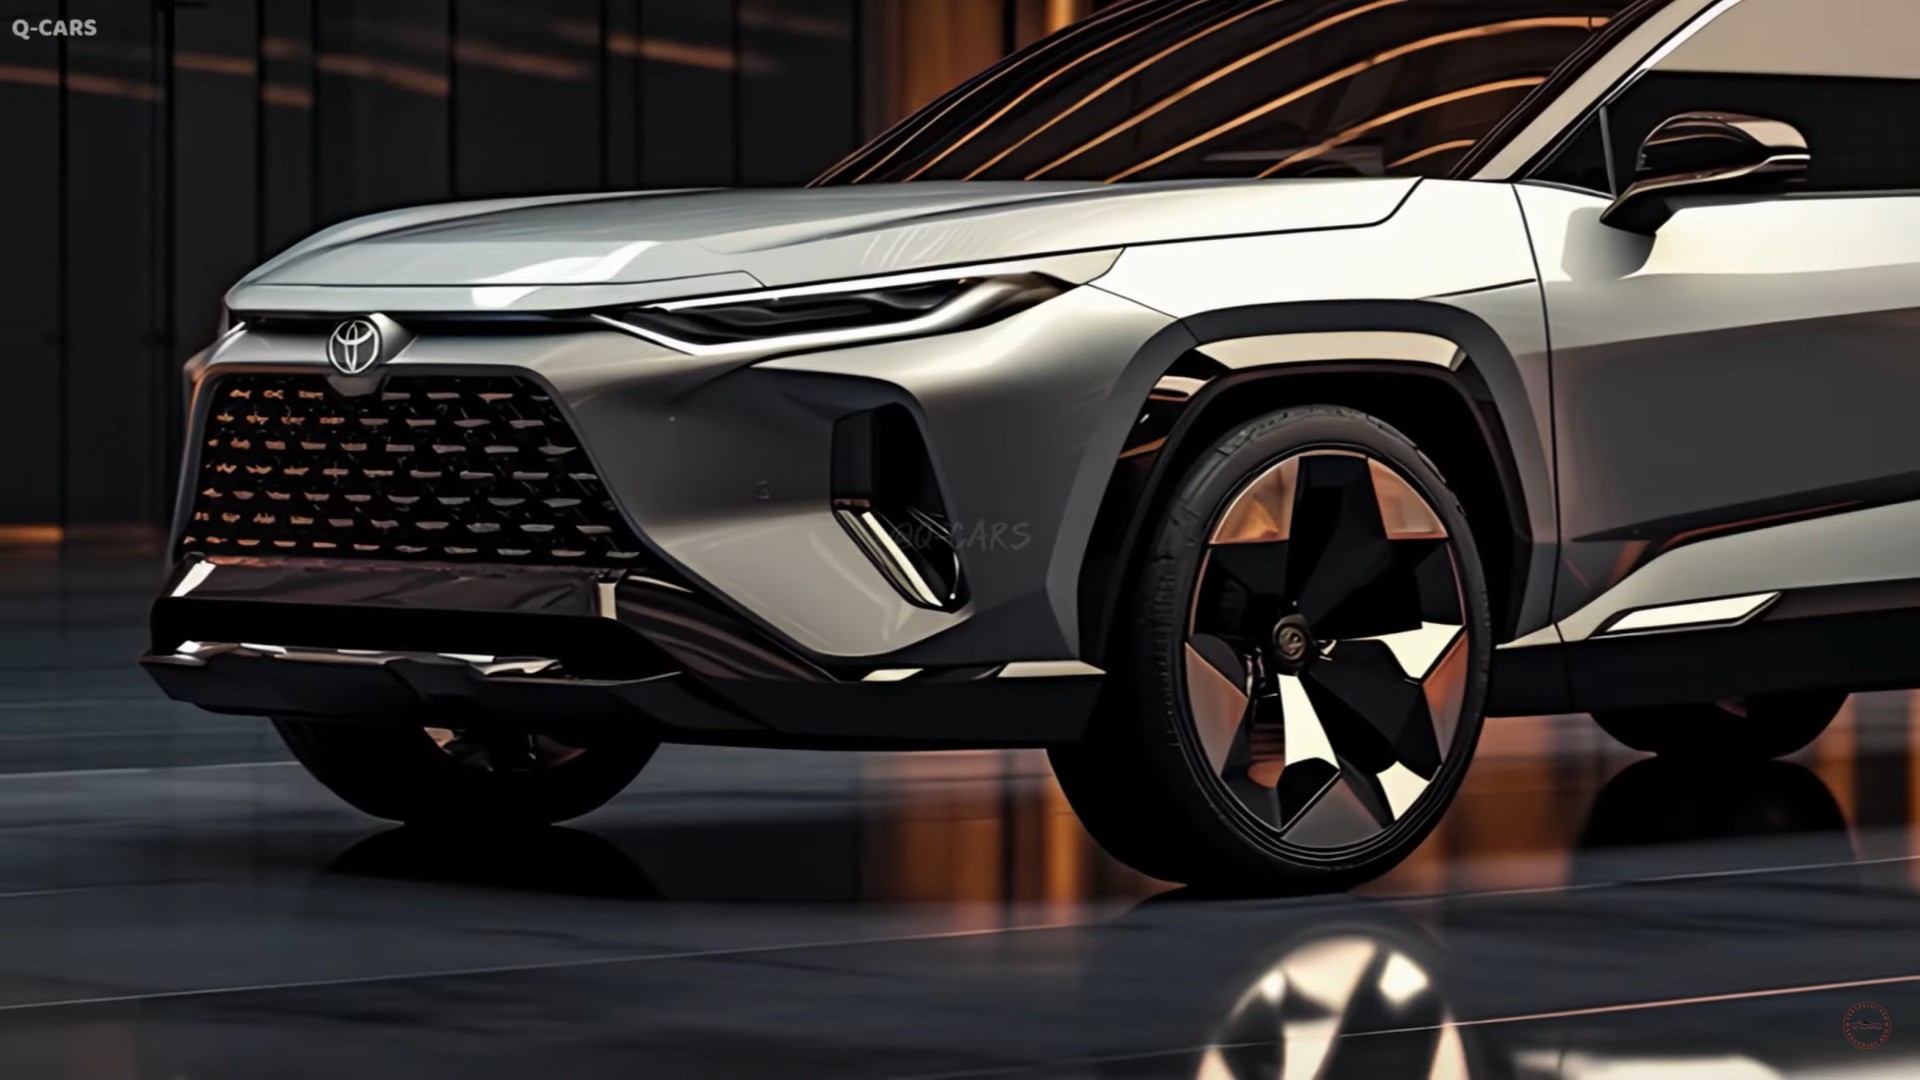 2025-toyota-rav4-features-a-satisfying-complete-redesign-albeit-all-unofficially-1.jpg